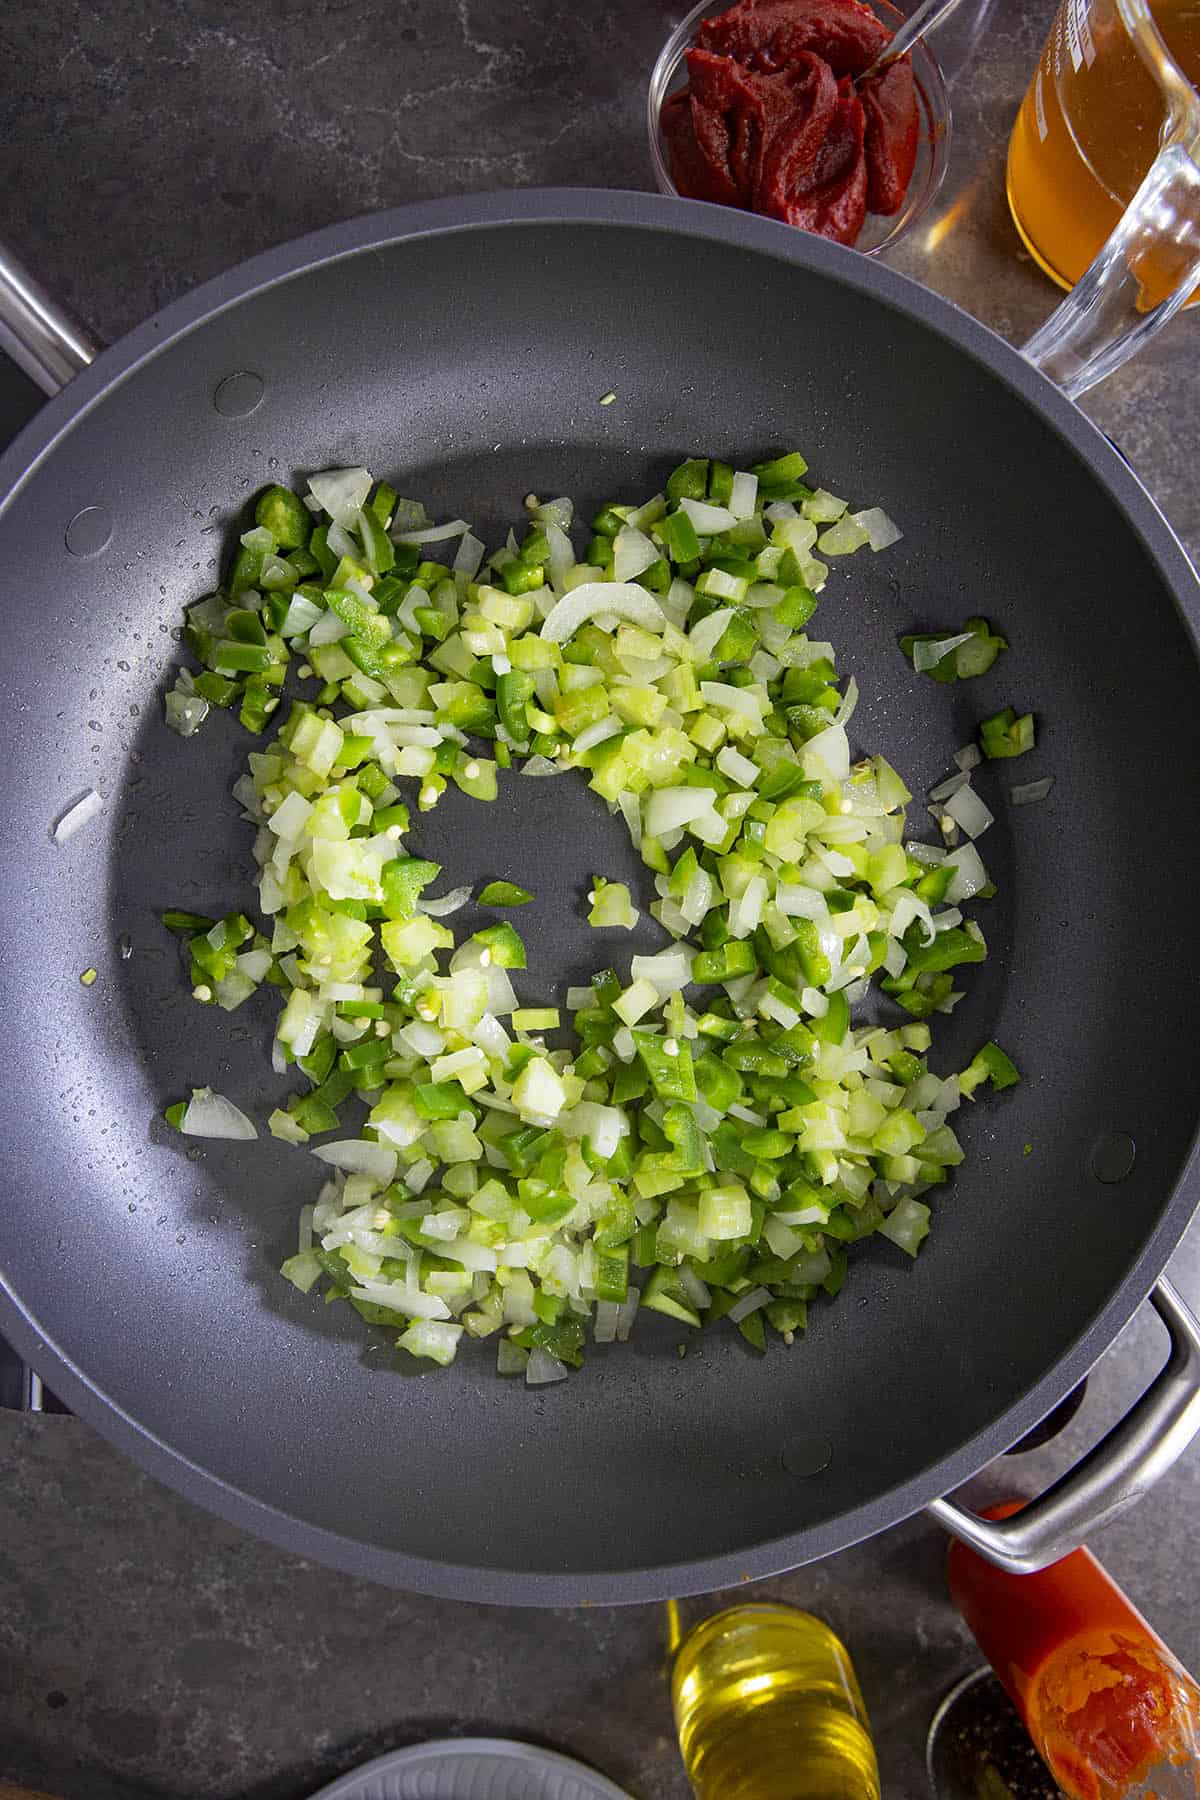 Cooking down peppers and onions in a pan